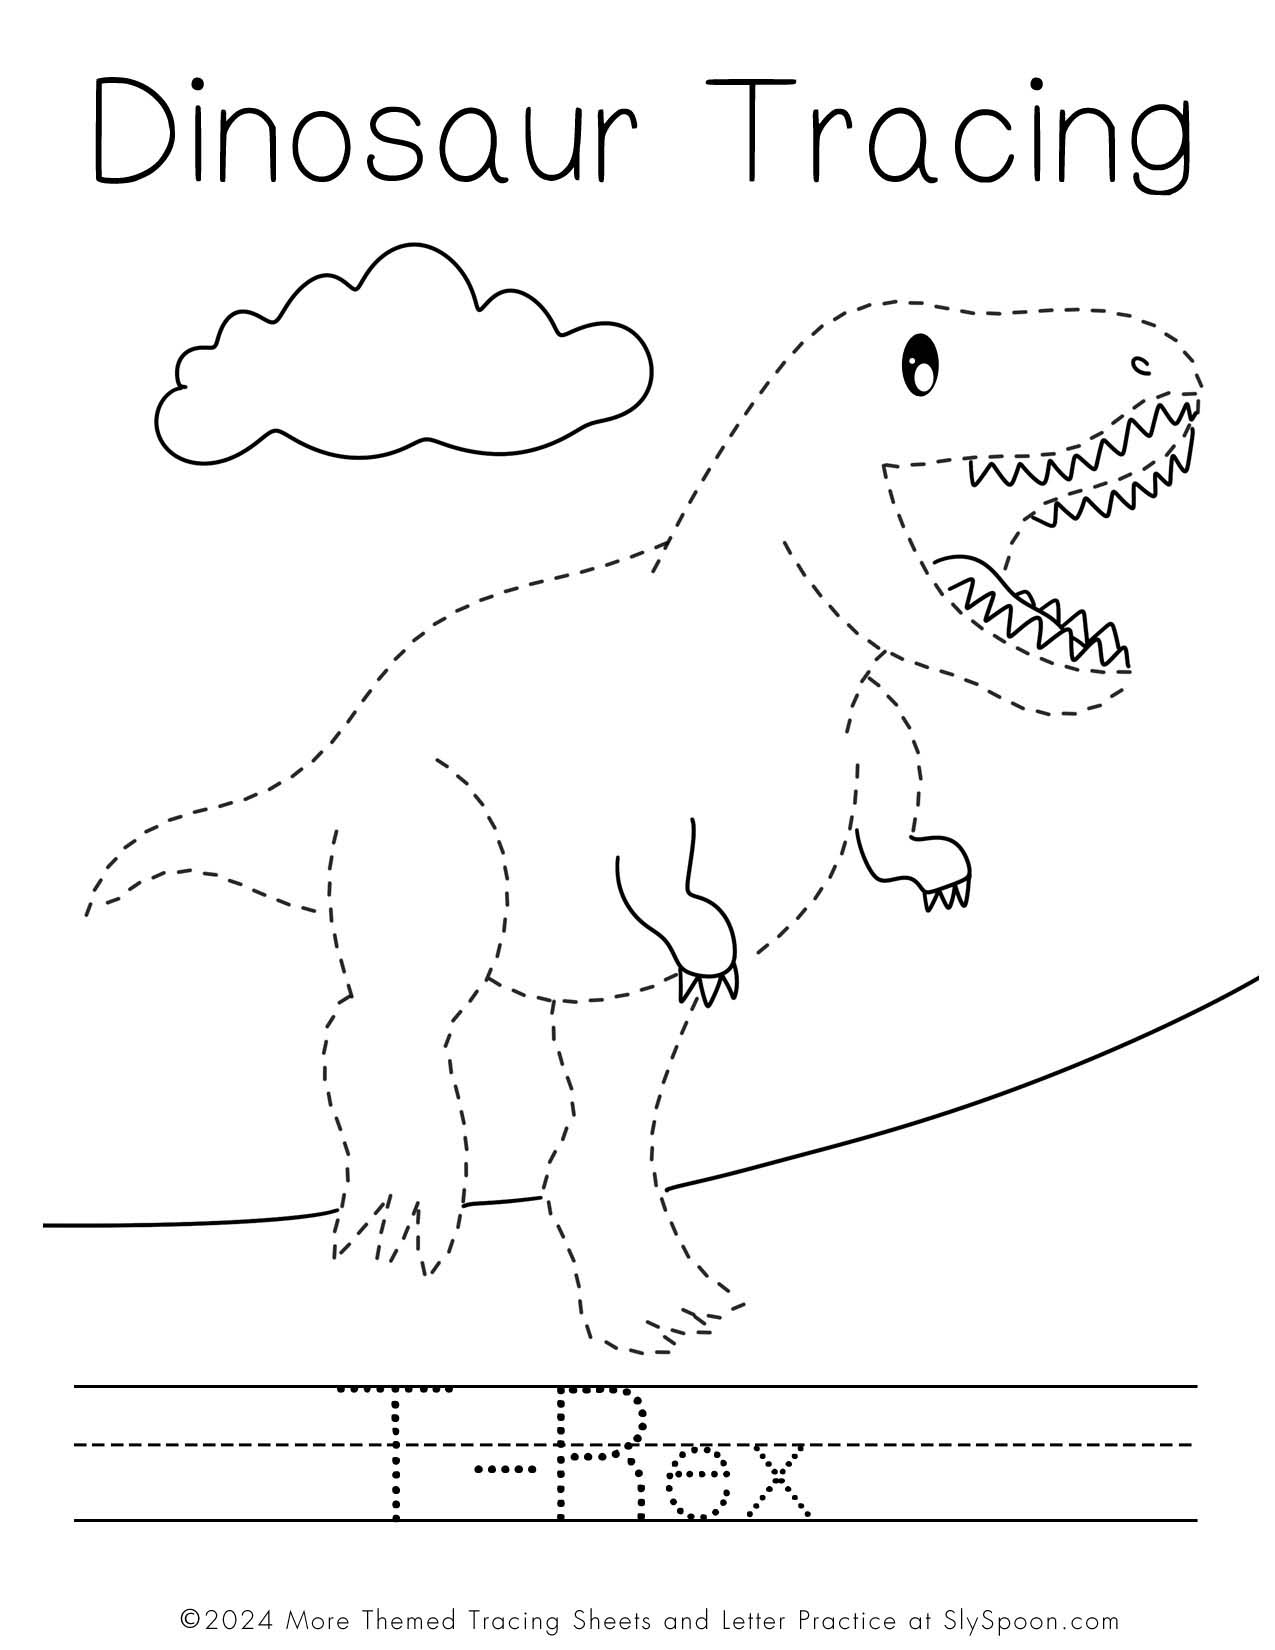 Free Dinosaur Letter Tracing pre-writing worksheets - T-rex